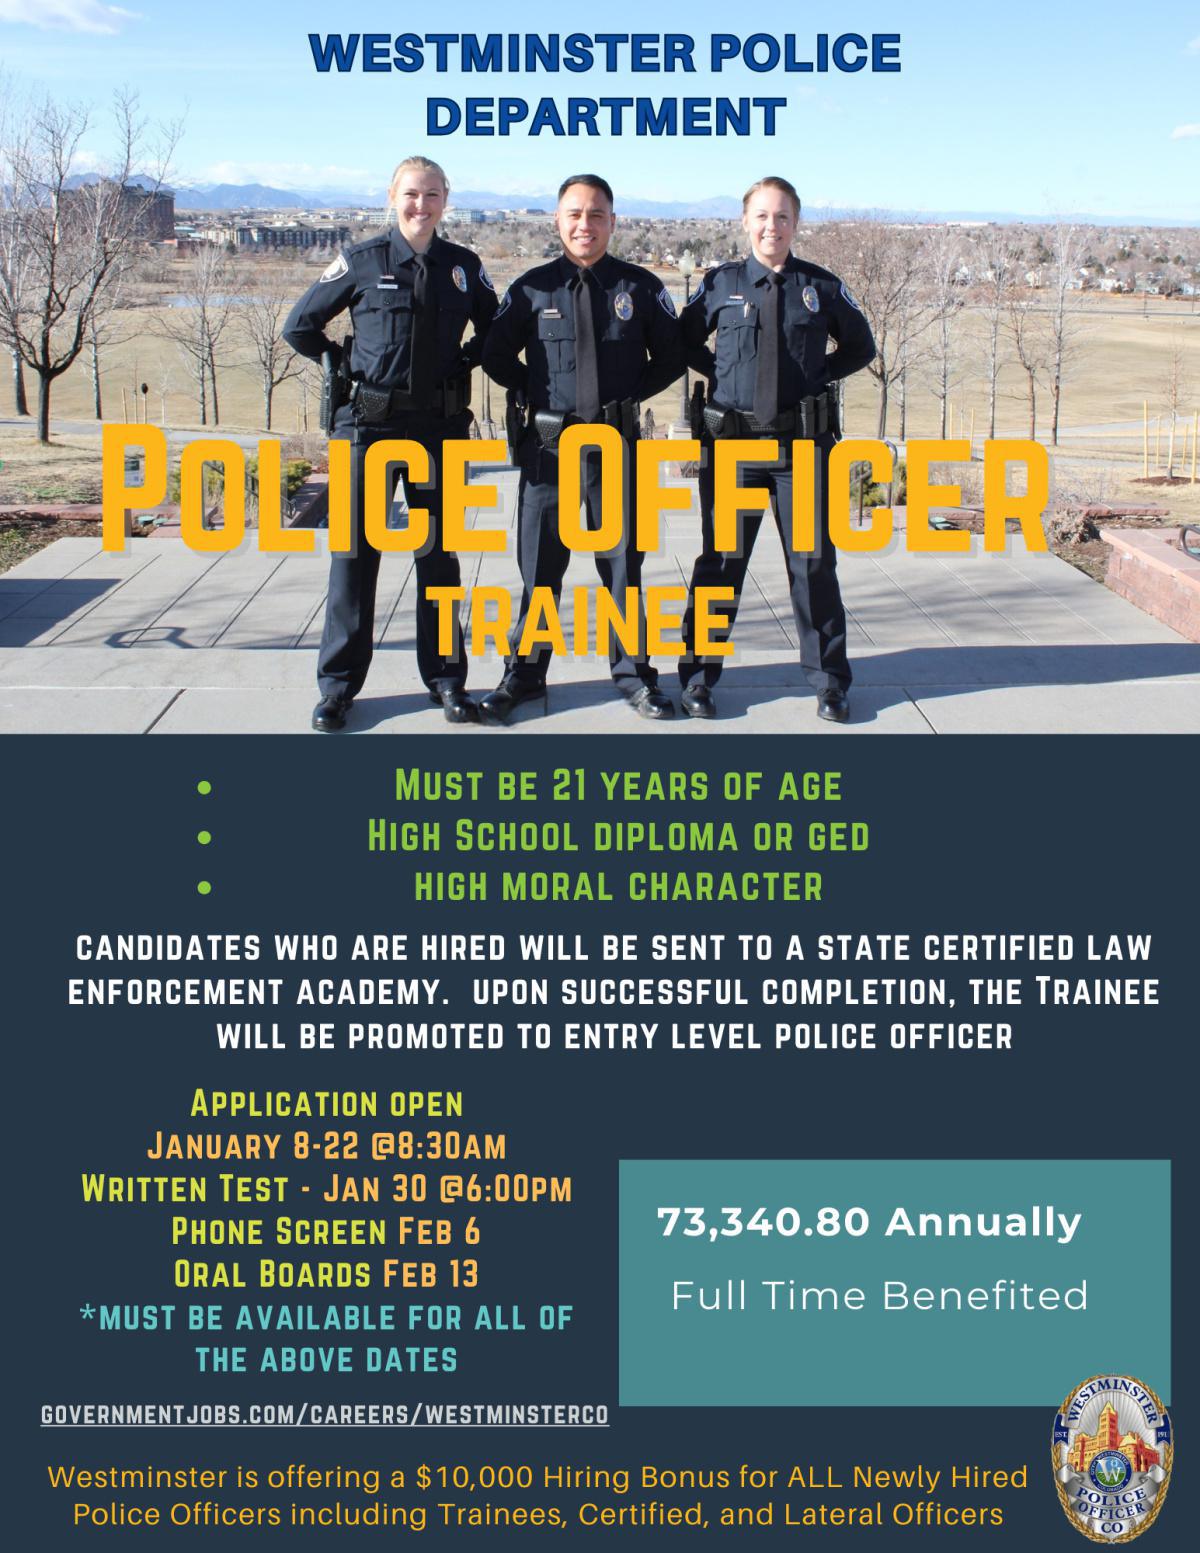 Were hiring - Police Officers